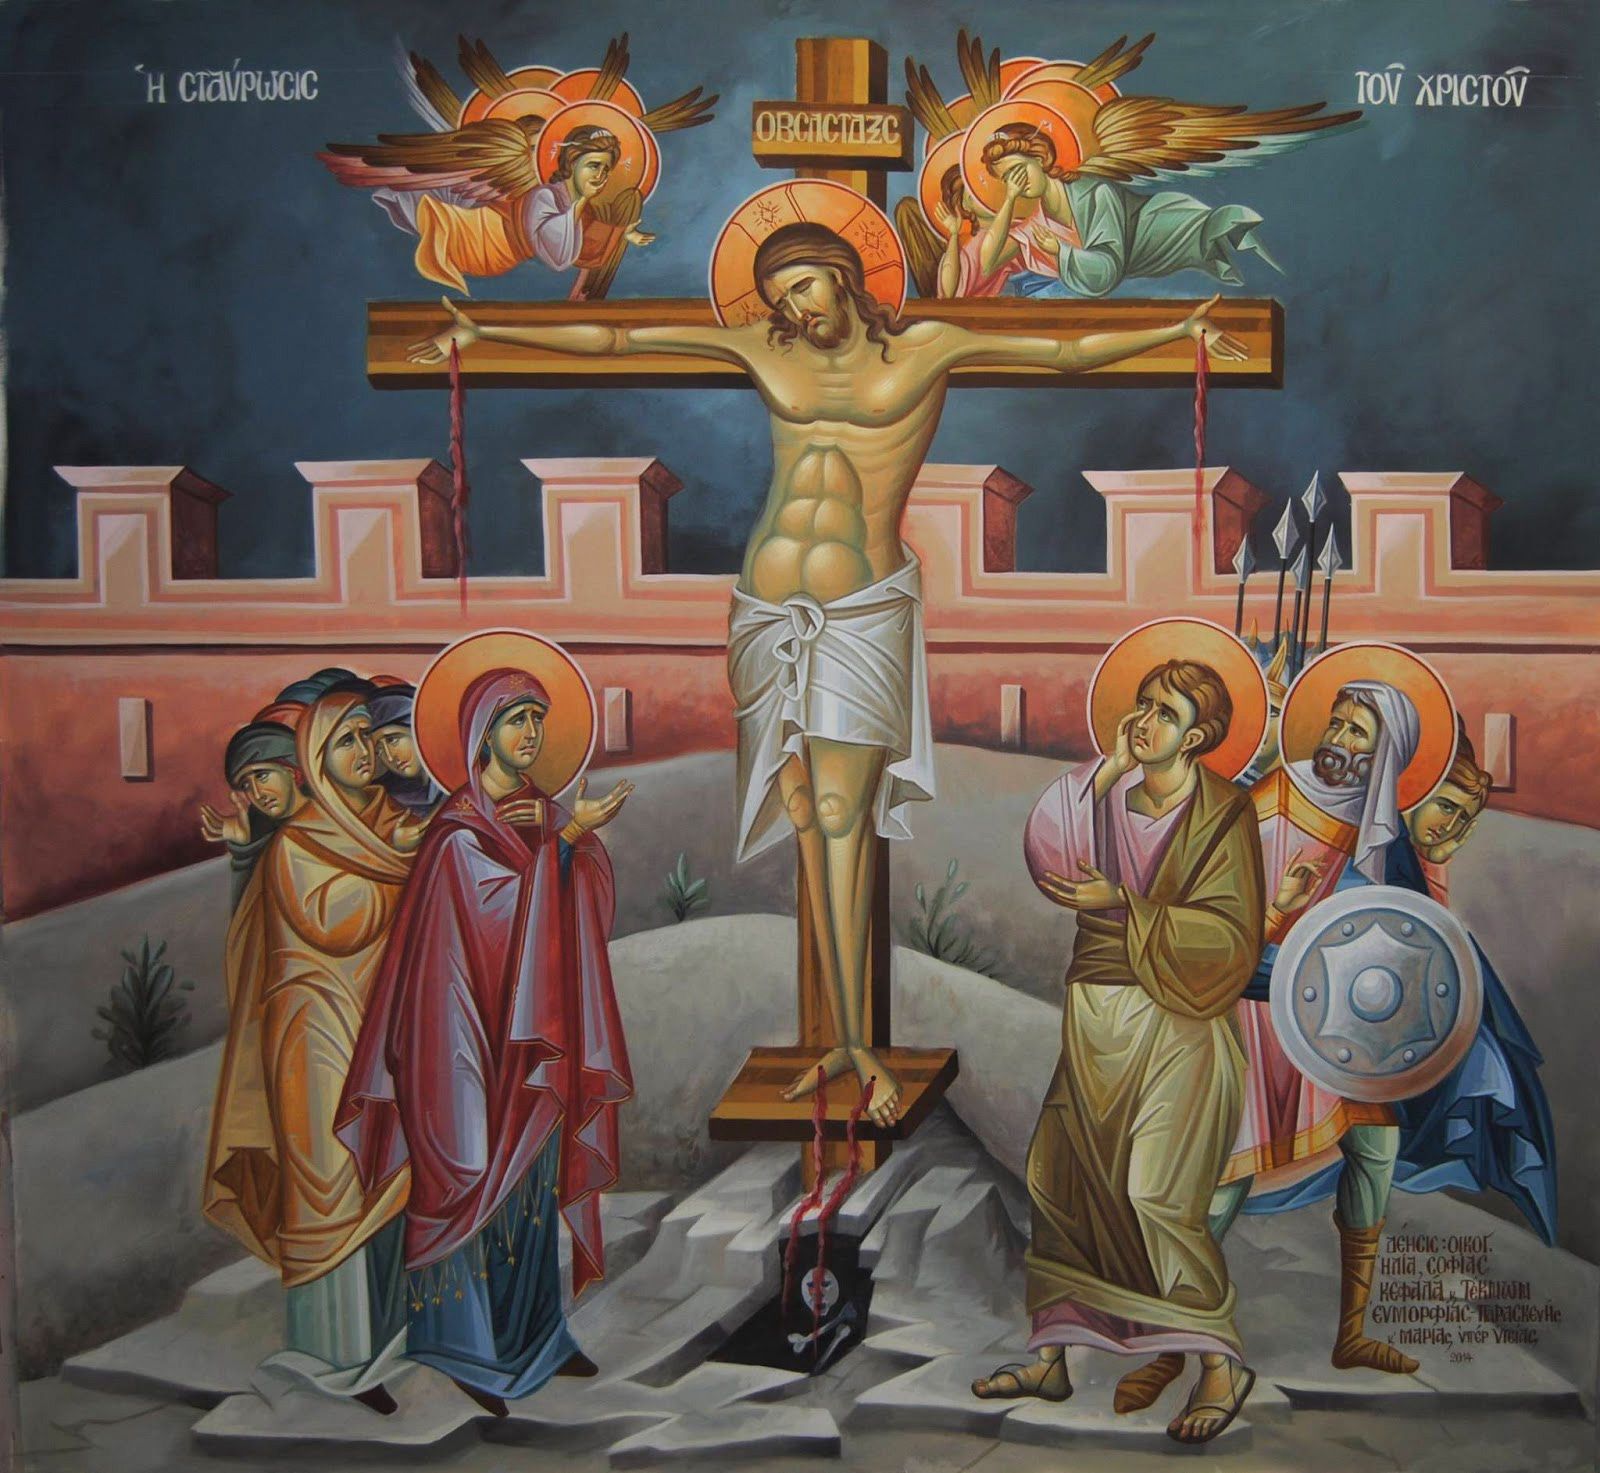 Christ Crucified on the Horizontal Line